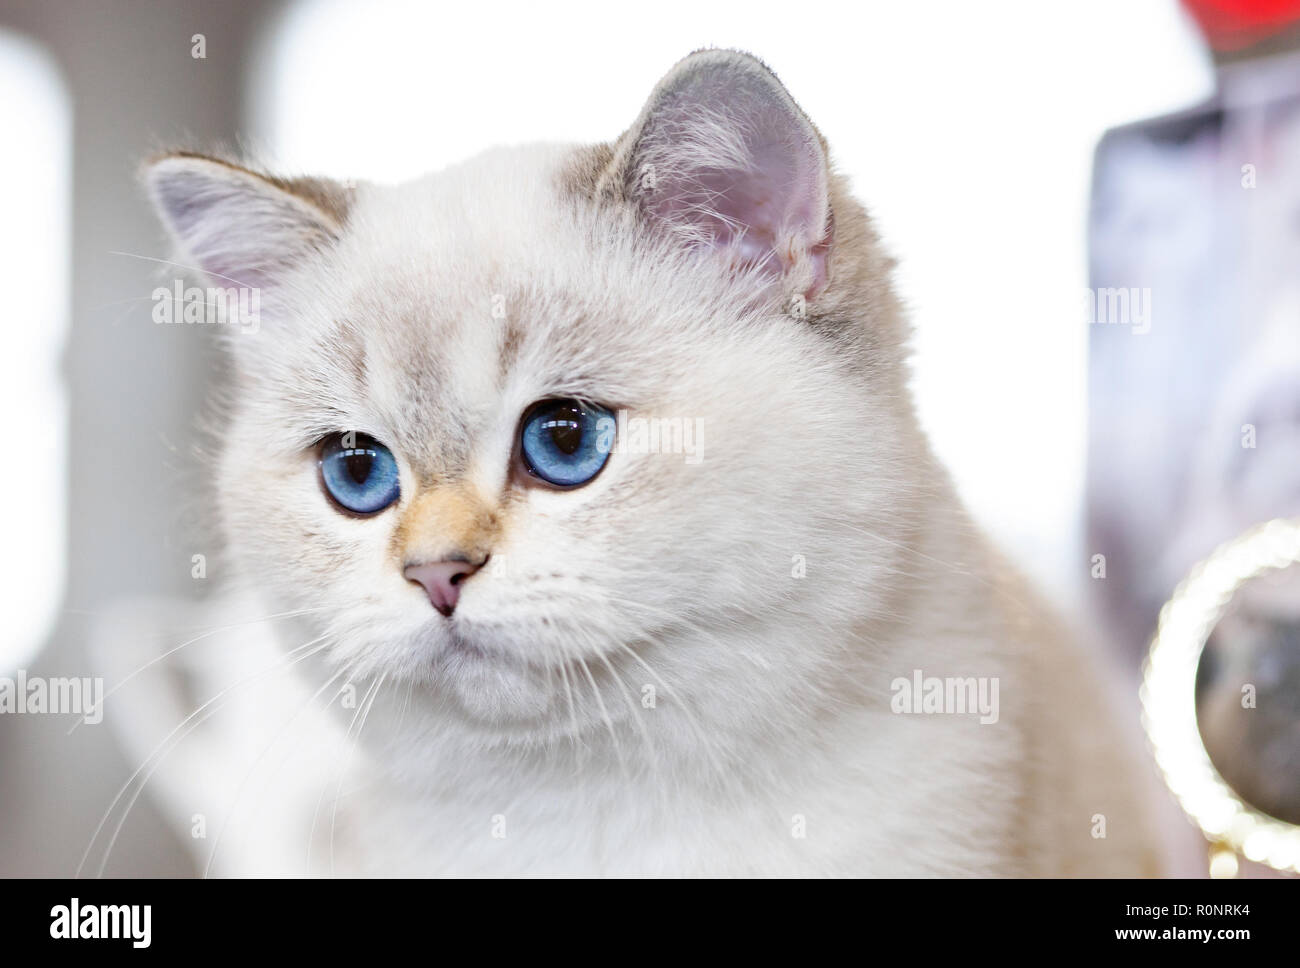 Portrait of a British Cat white color with blue eyes. Stock Photo